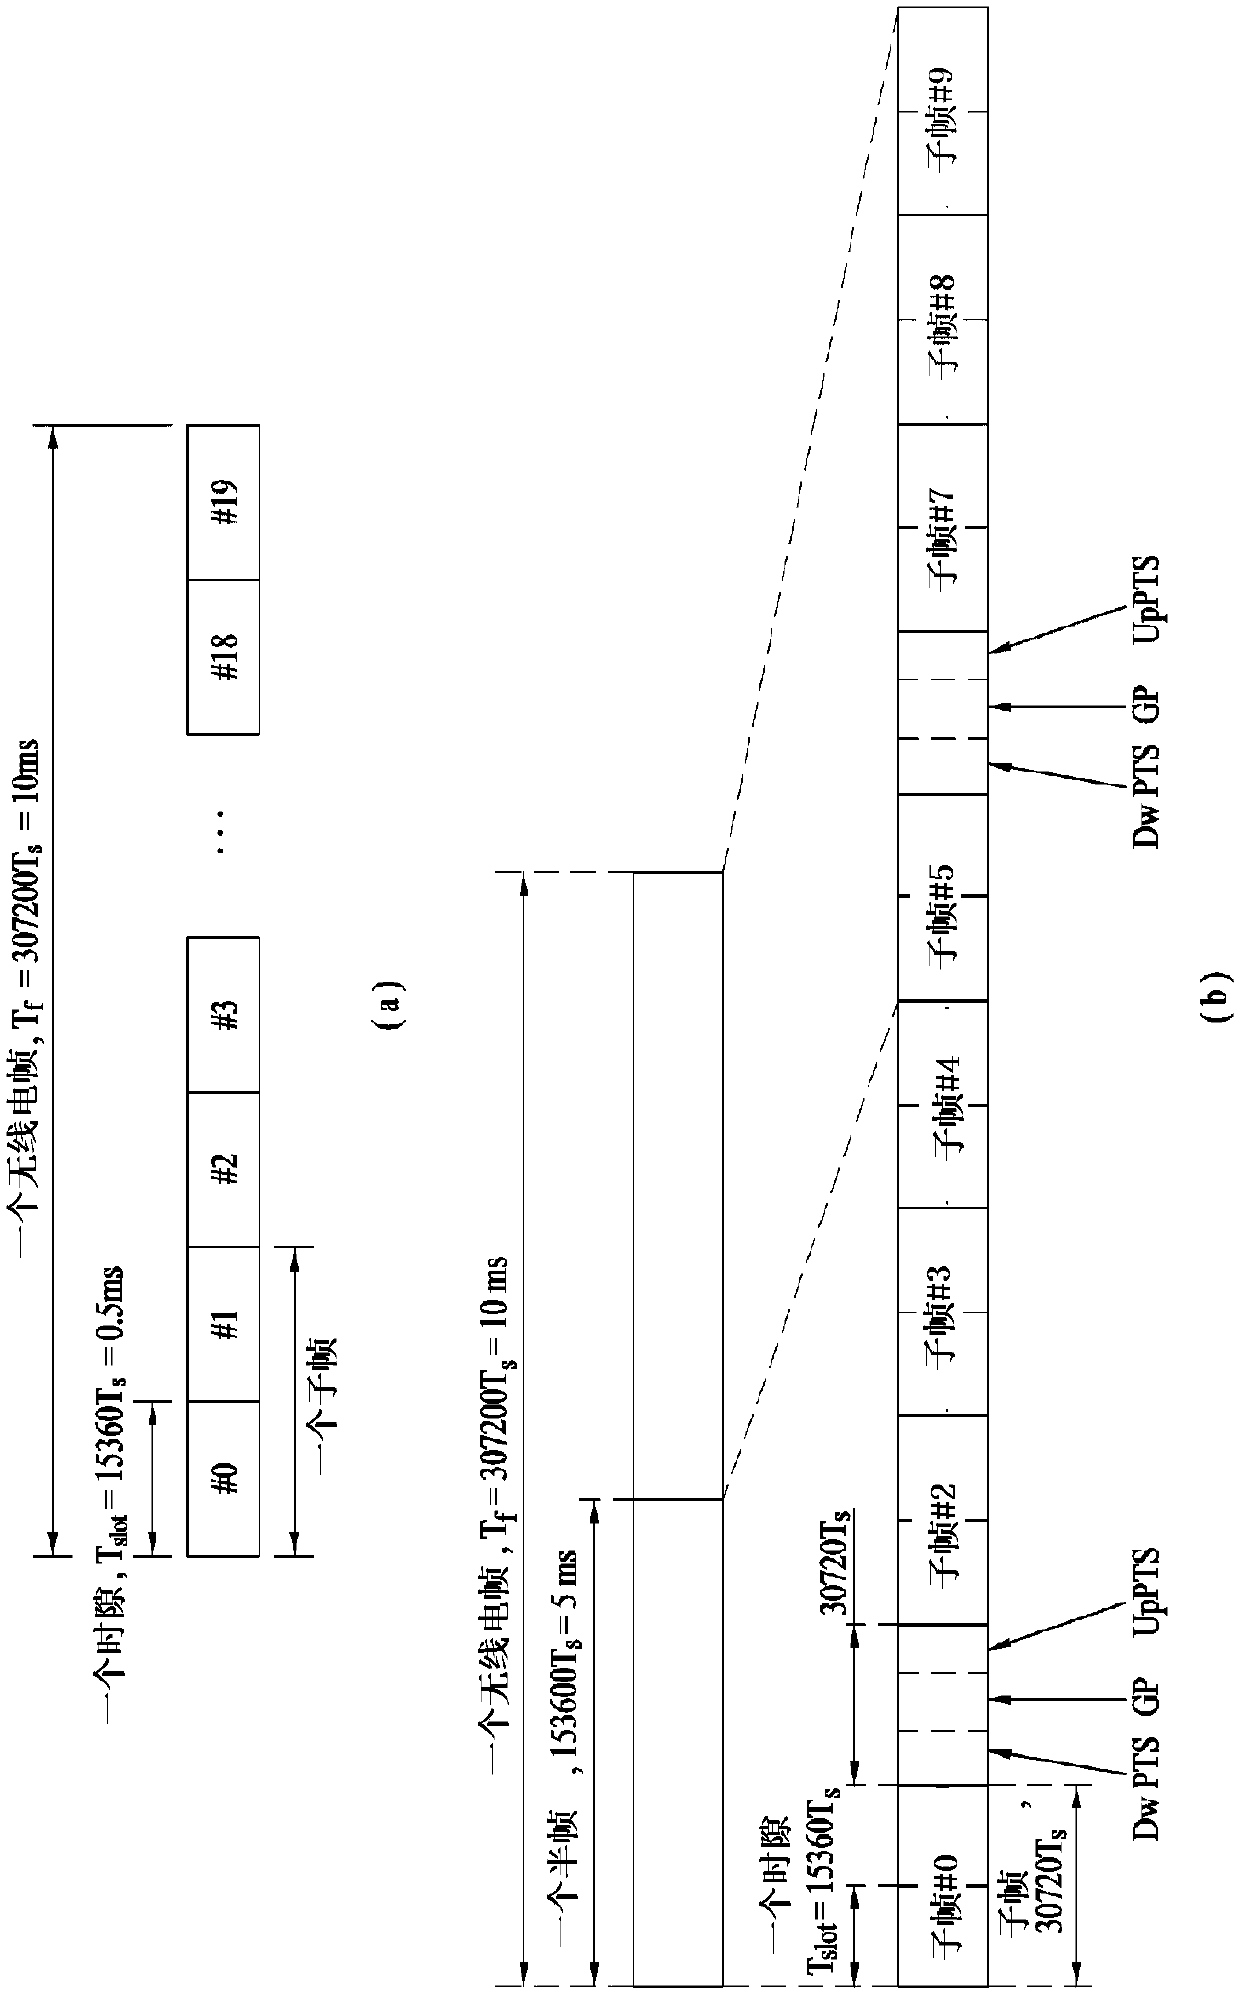 Method for receiving or transmitting reference signal for location determination in wireless communication system and device for same